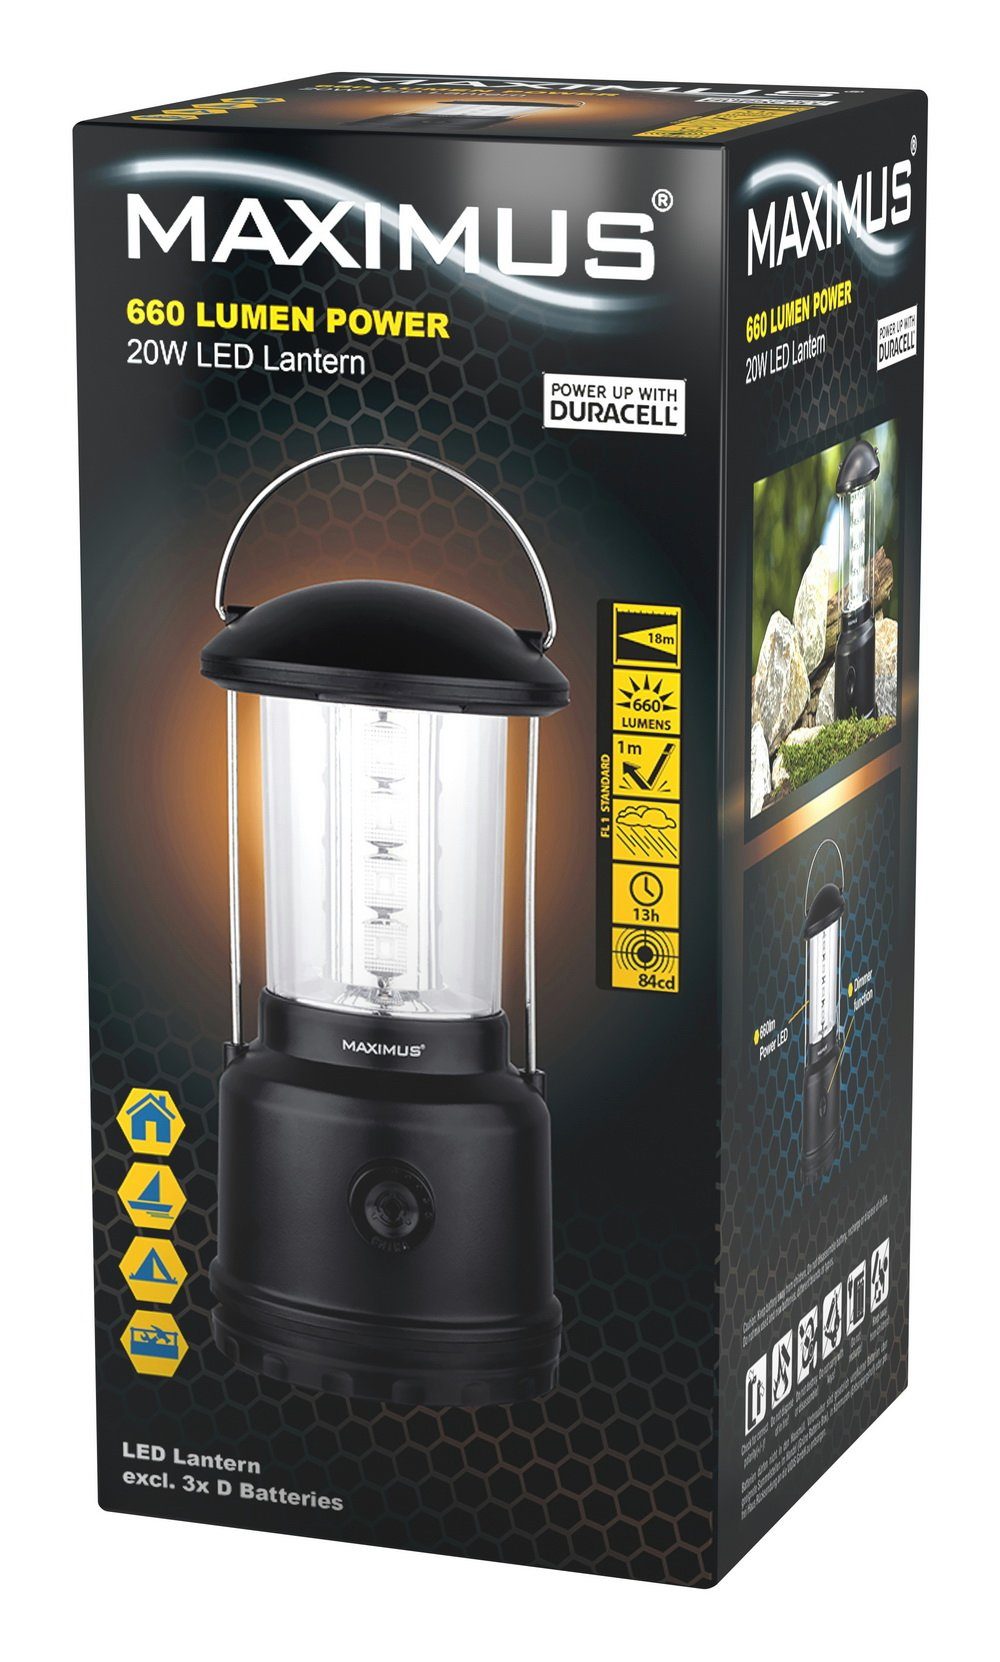 Campinglaterne LED-Laterne indoor Dimmer Campinglampe M-LNT-200, lm Camping Laterne Leuchte outdoor mit 660 Maximus